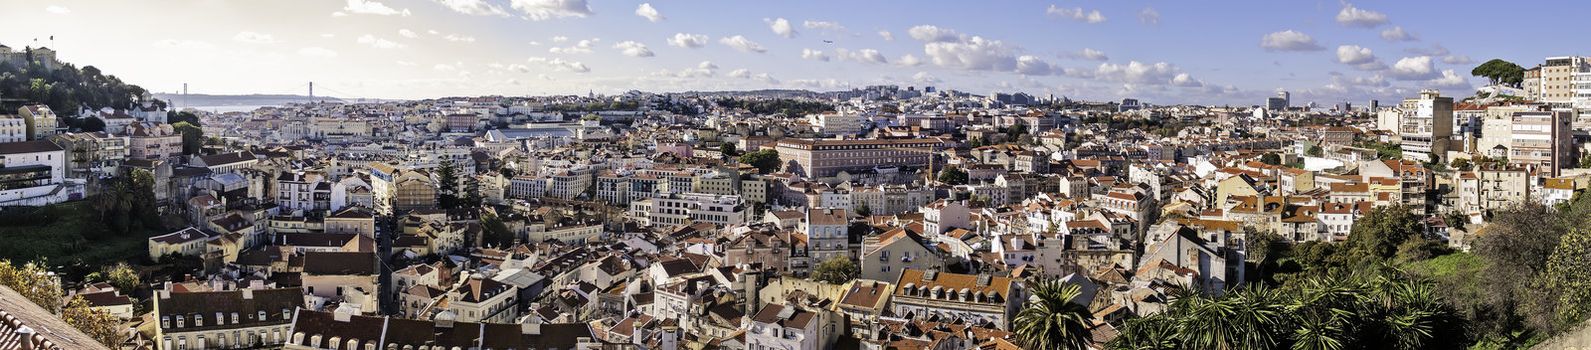 Lisbon, November 2012. Panoramic view from Gra�a viewpoint.